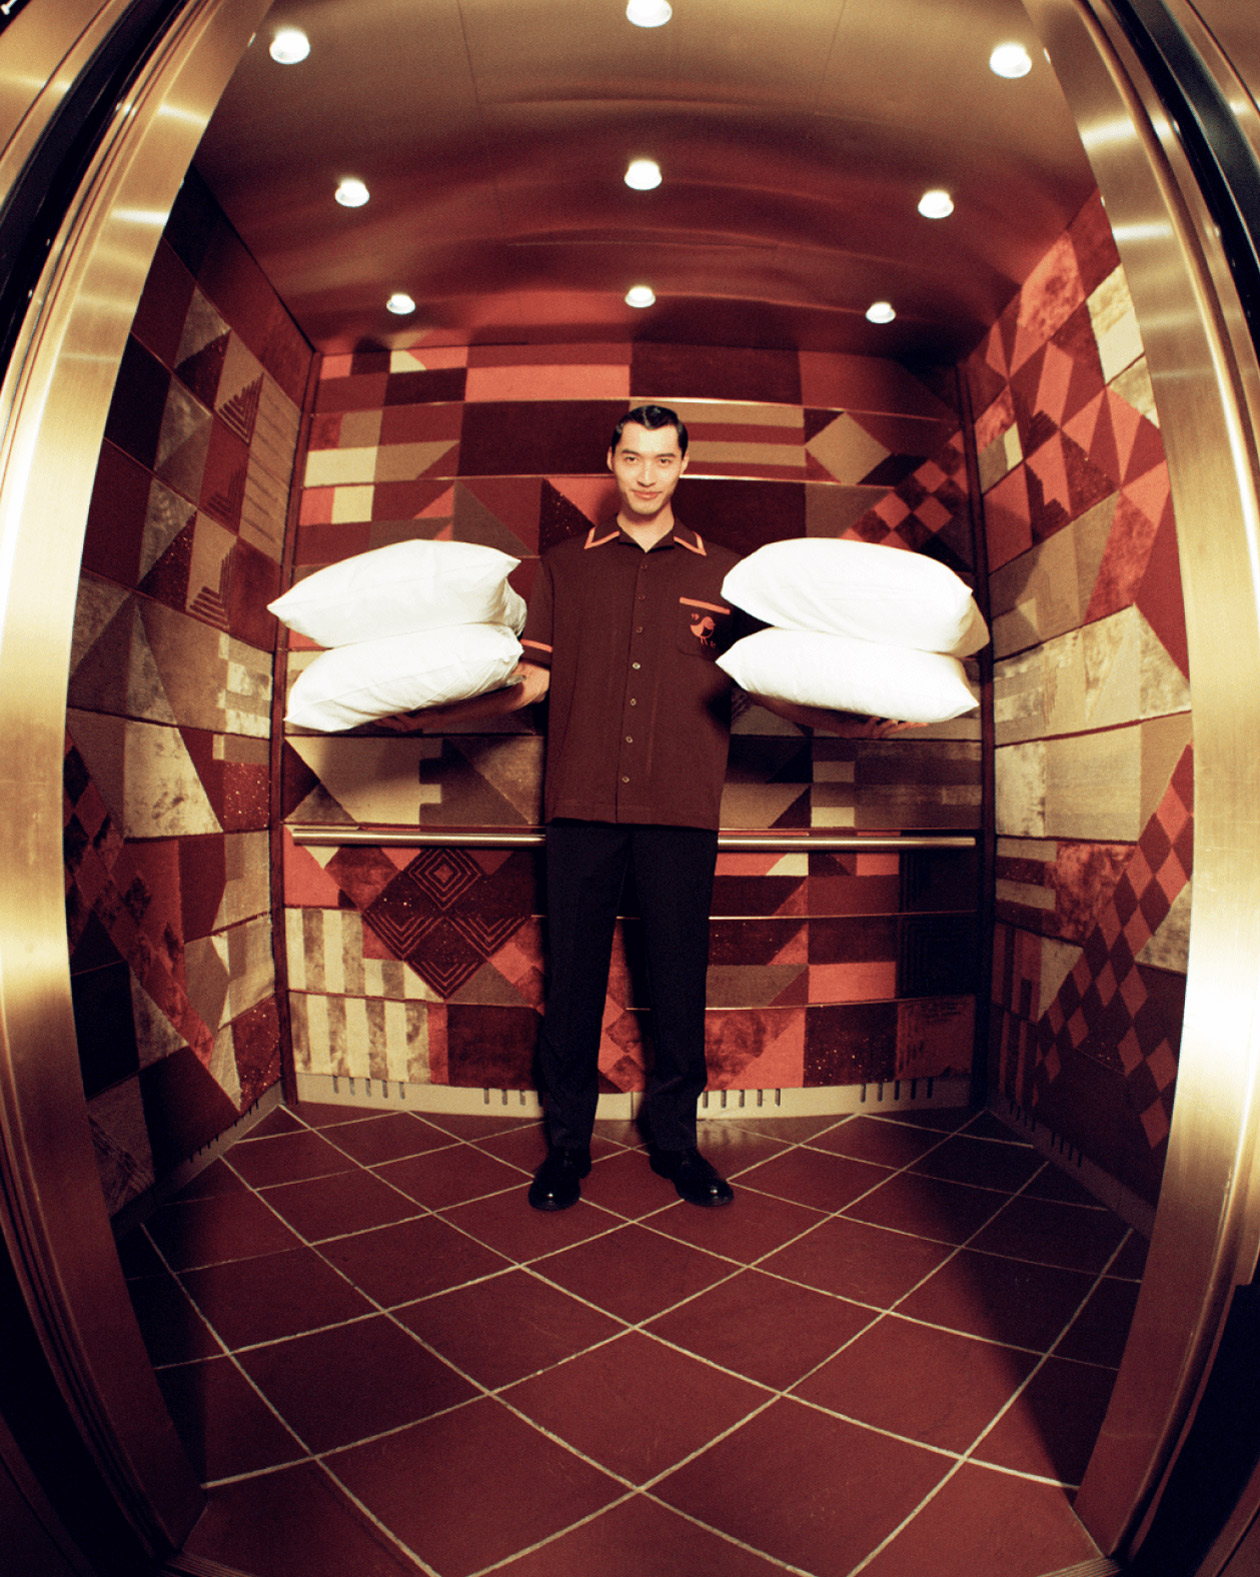 A bellhop standing in an elevator with red and patterned walls, holding a stack of white pillows. The bellhop is dressed in a dark uniform and is looking directly at the camera.